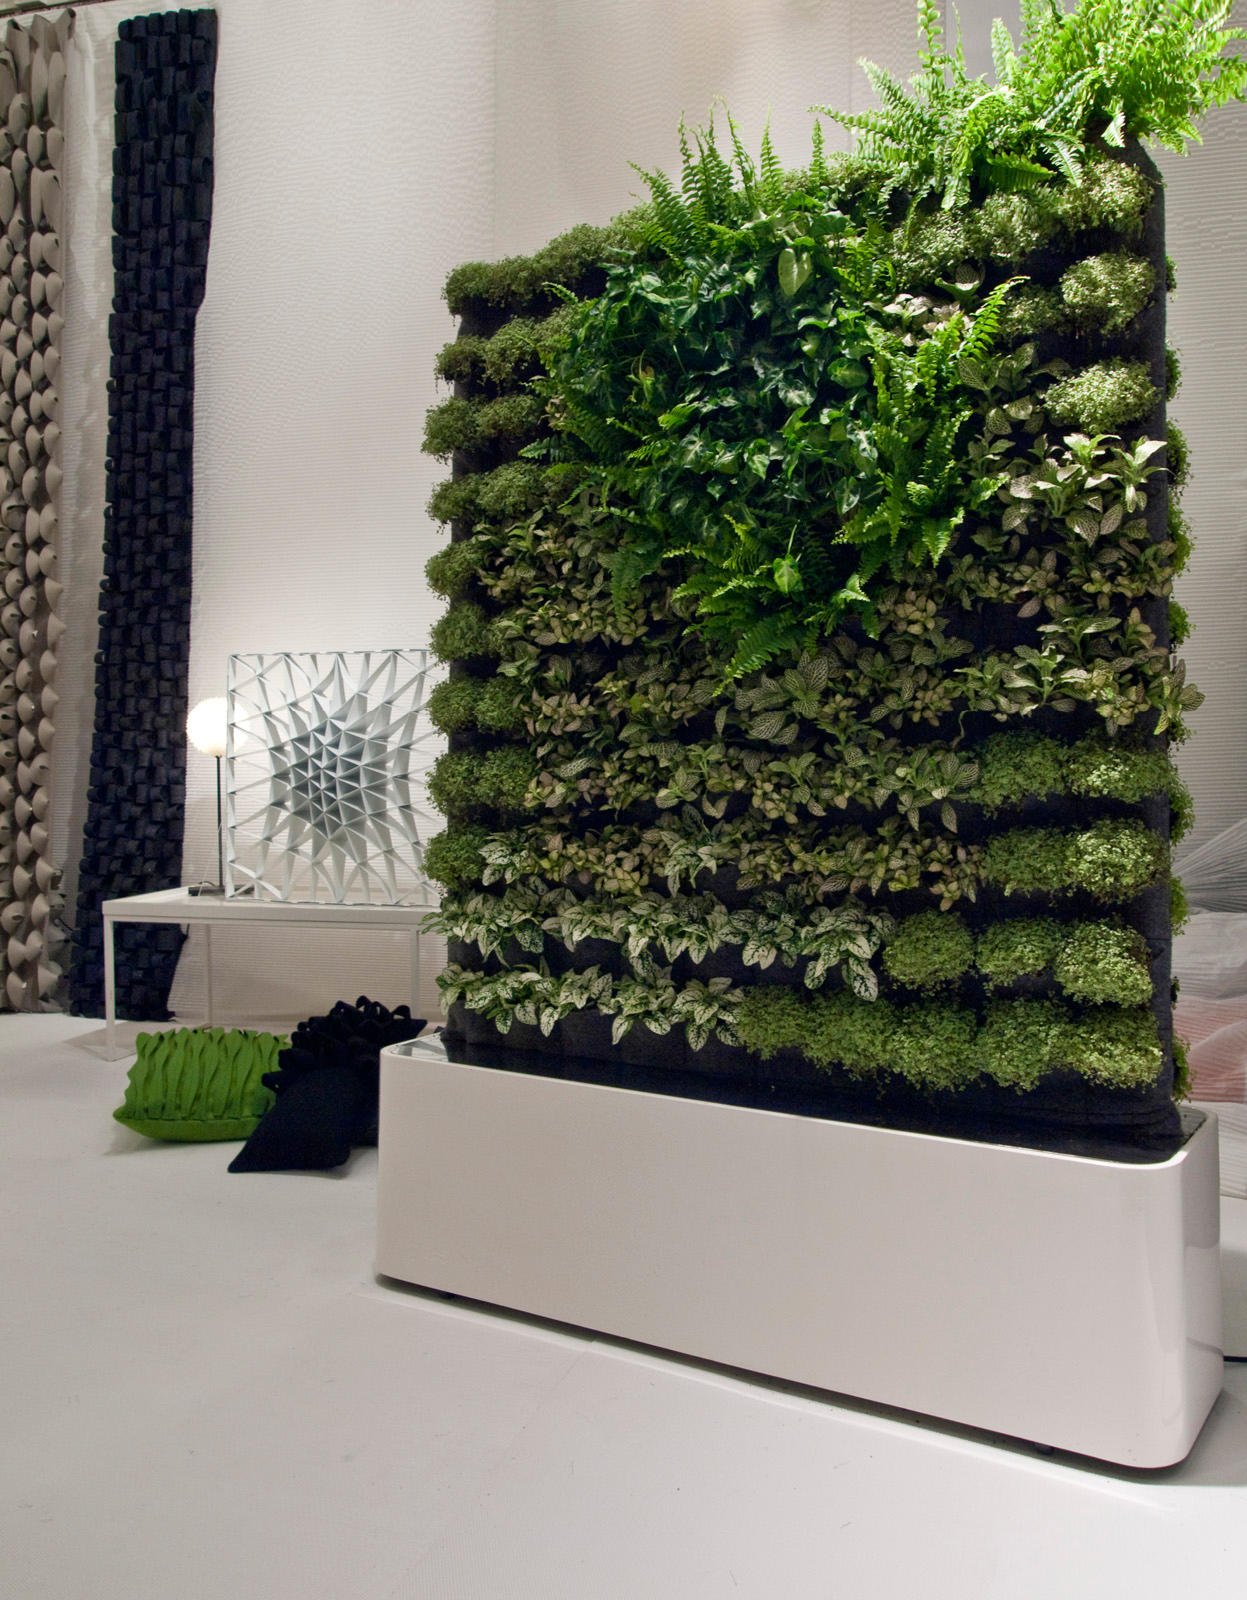 MOVING HEDGE - Privacy from Greenworks | Architonic